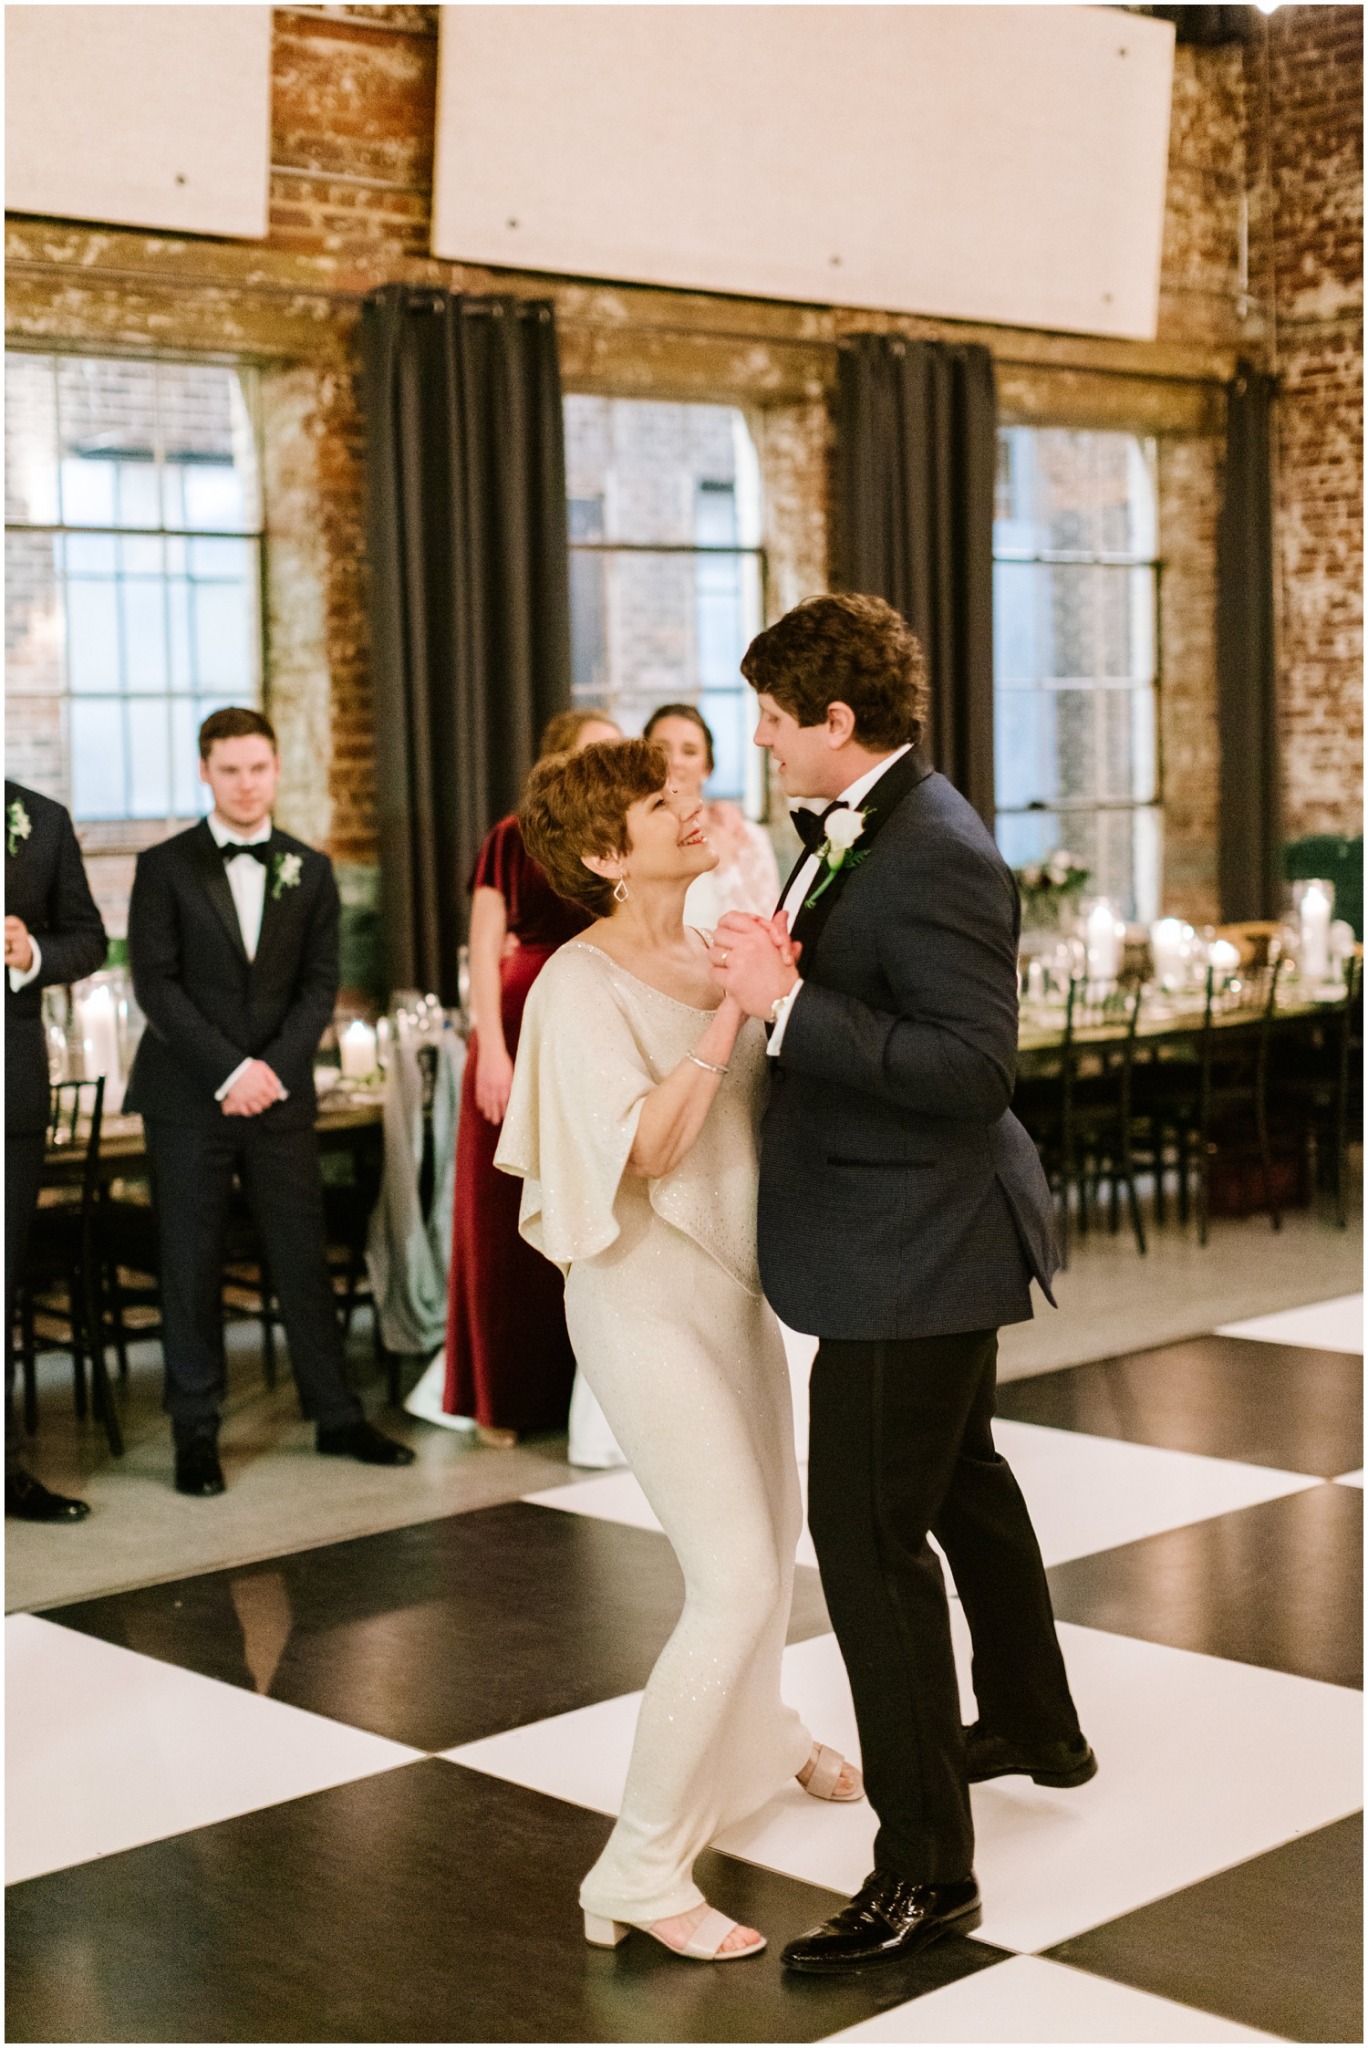 mother and son dance during wedding reception at the Cadillac Service Garage